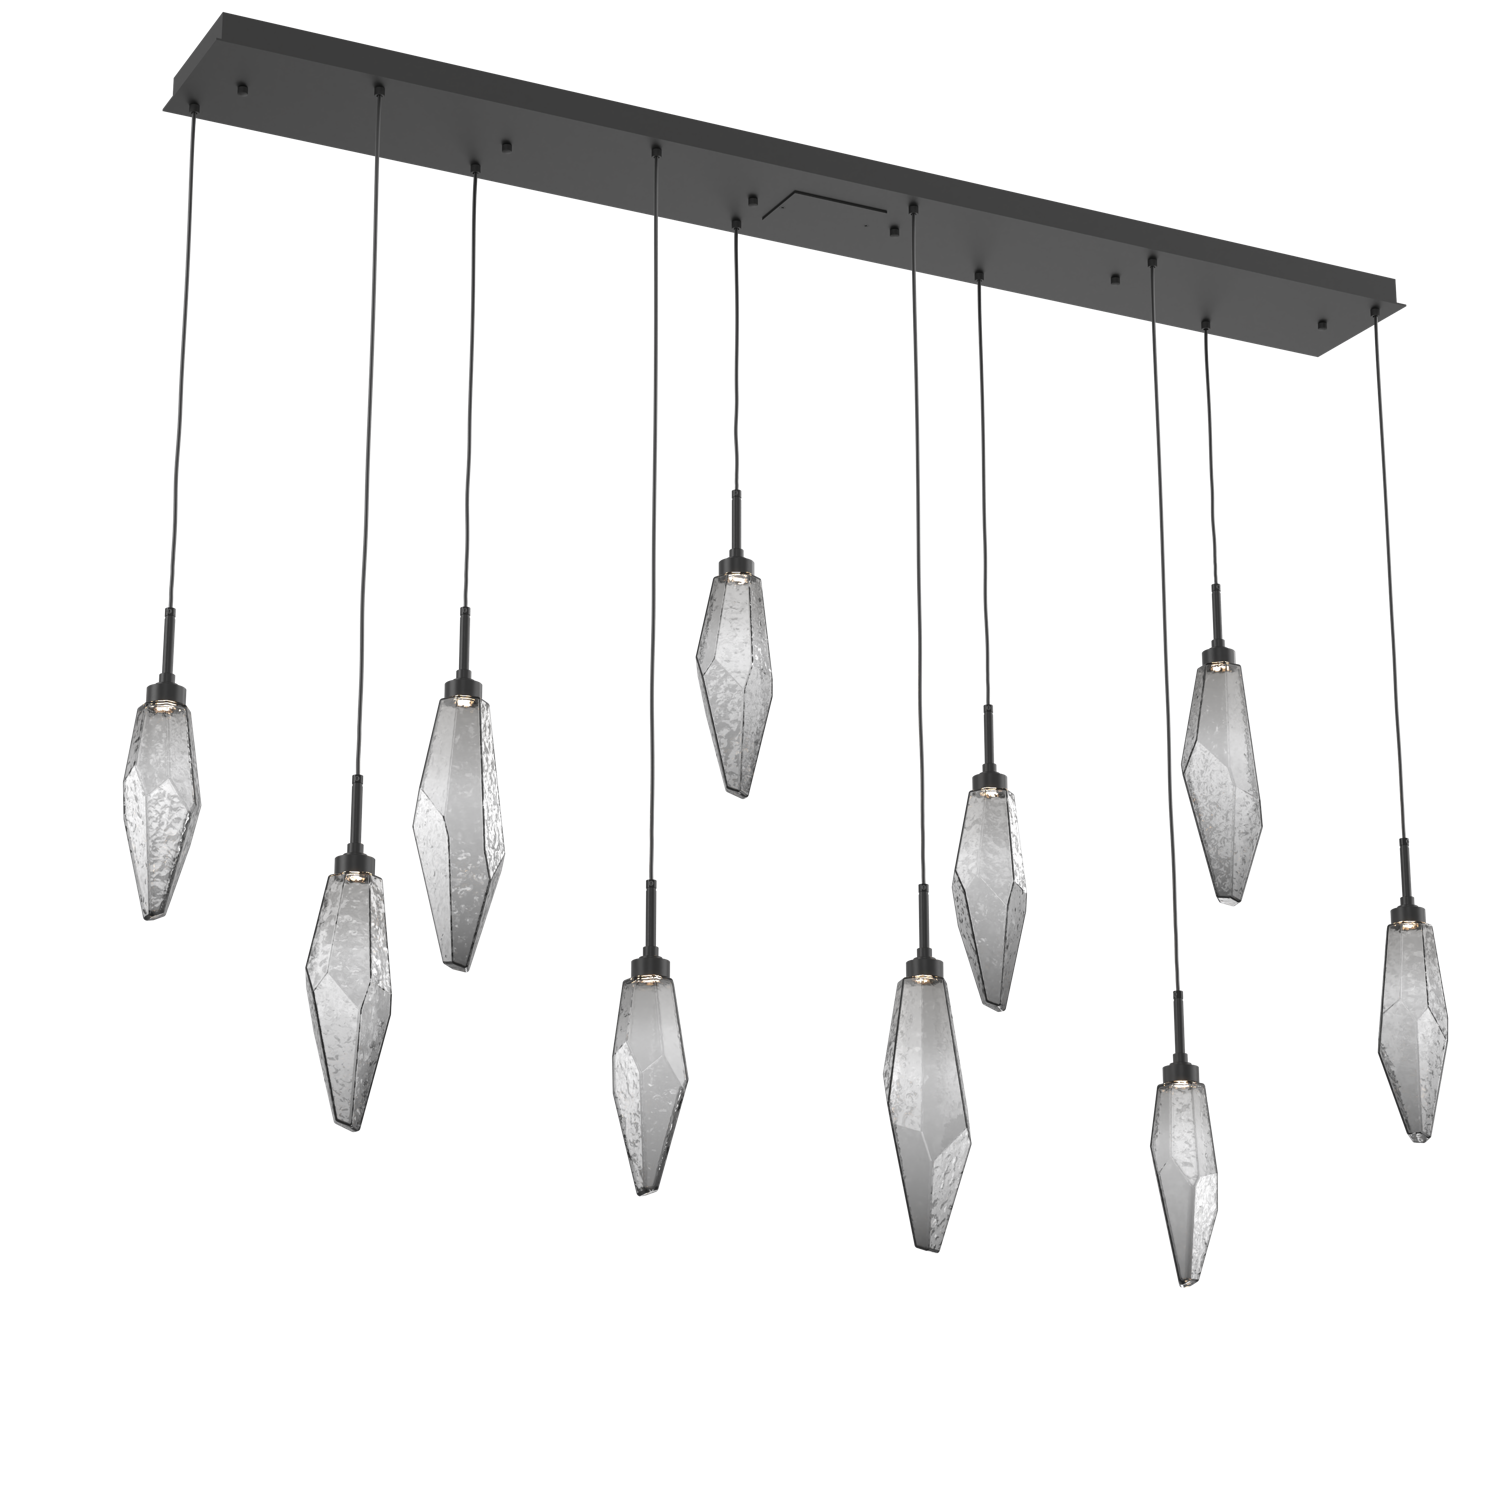 PLB0050-10-MB-CS-Hammerton-Studio-Rock-Crystal-10-light-linear-pendant-chandelier-with-matte-black-finish-and-chilled-smoke-glass-shades-and-LED-lamping